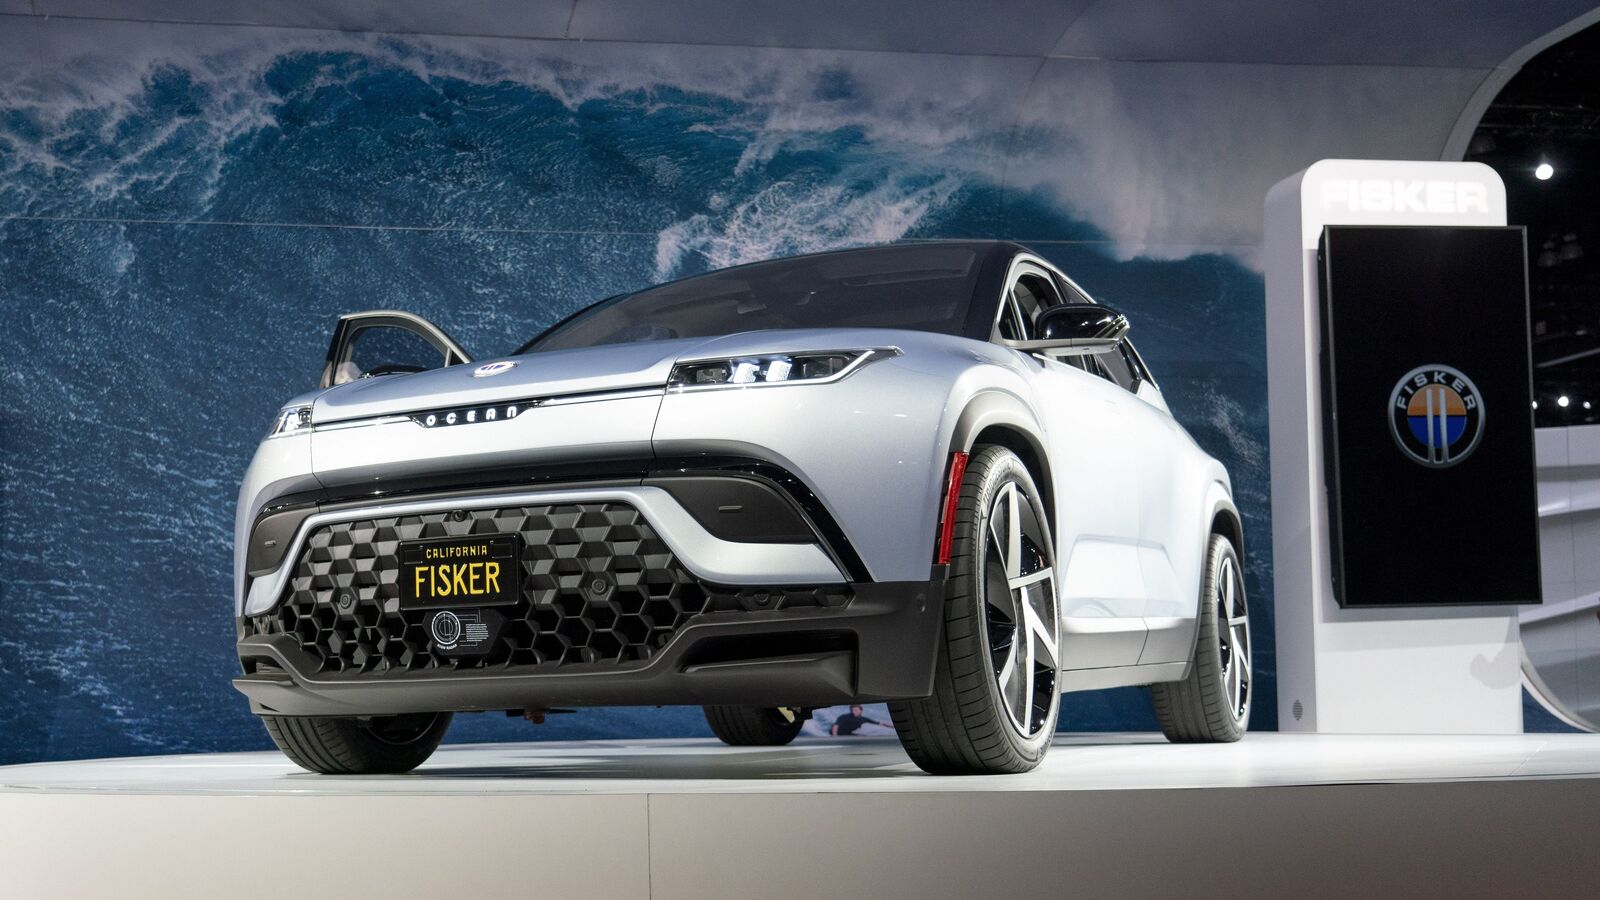 The World's Largest Electric Vehicle Maker Also Has a US Presence